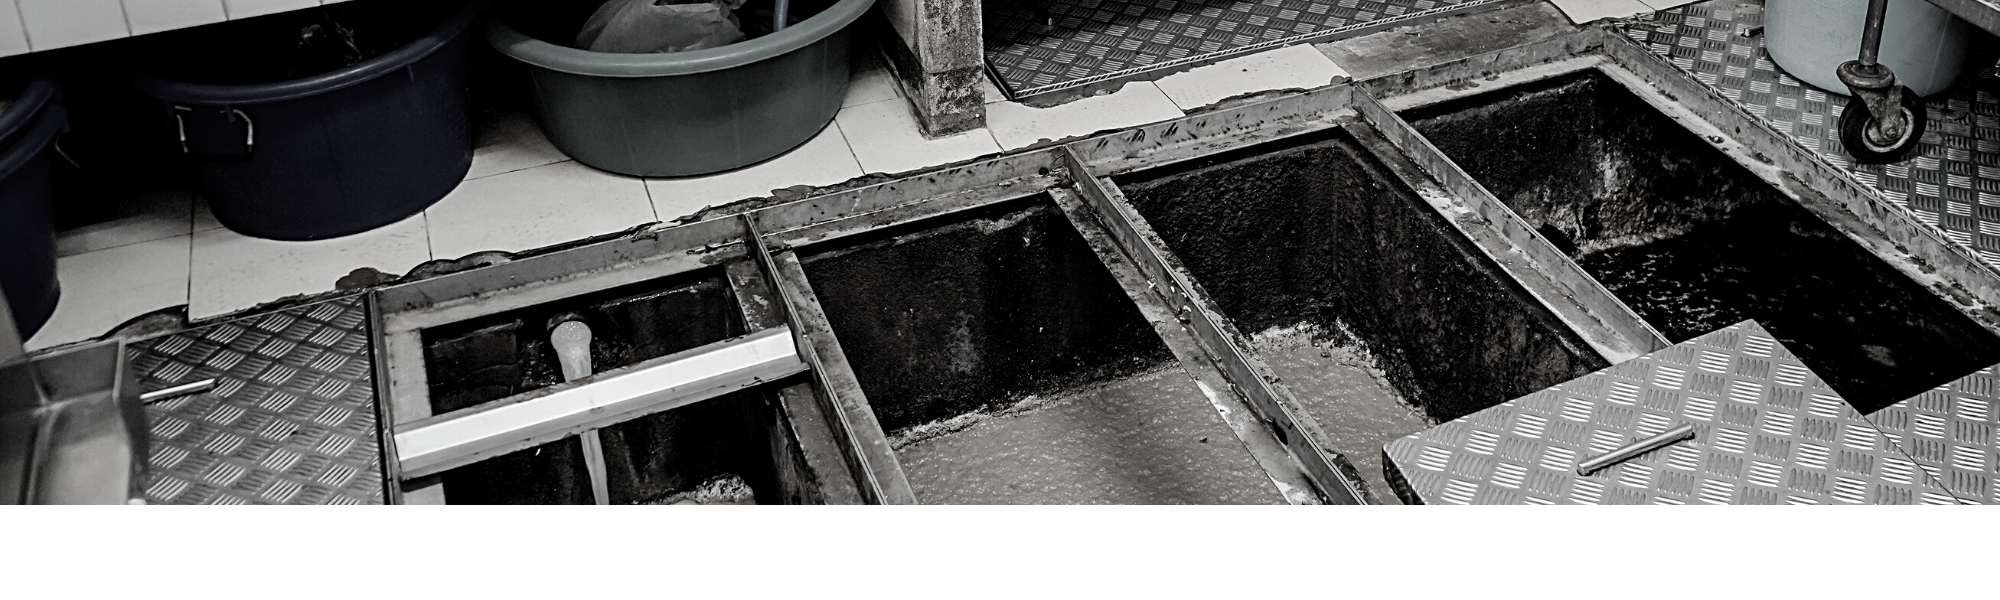 commercial grease traps 